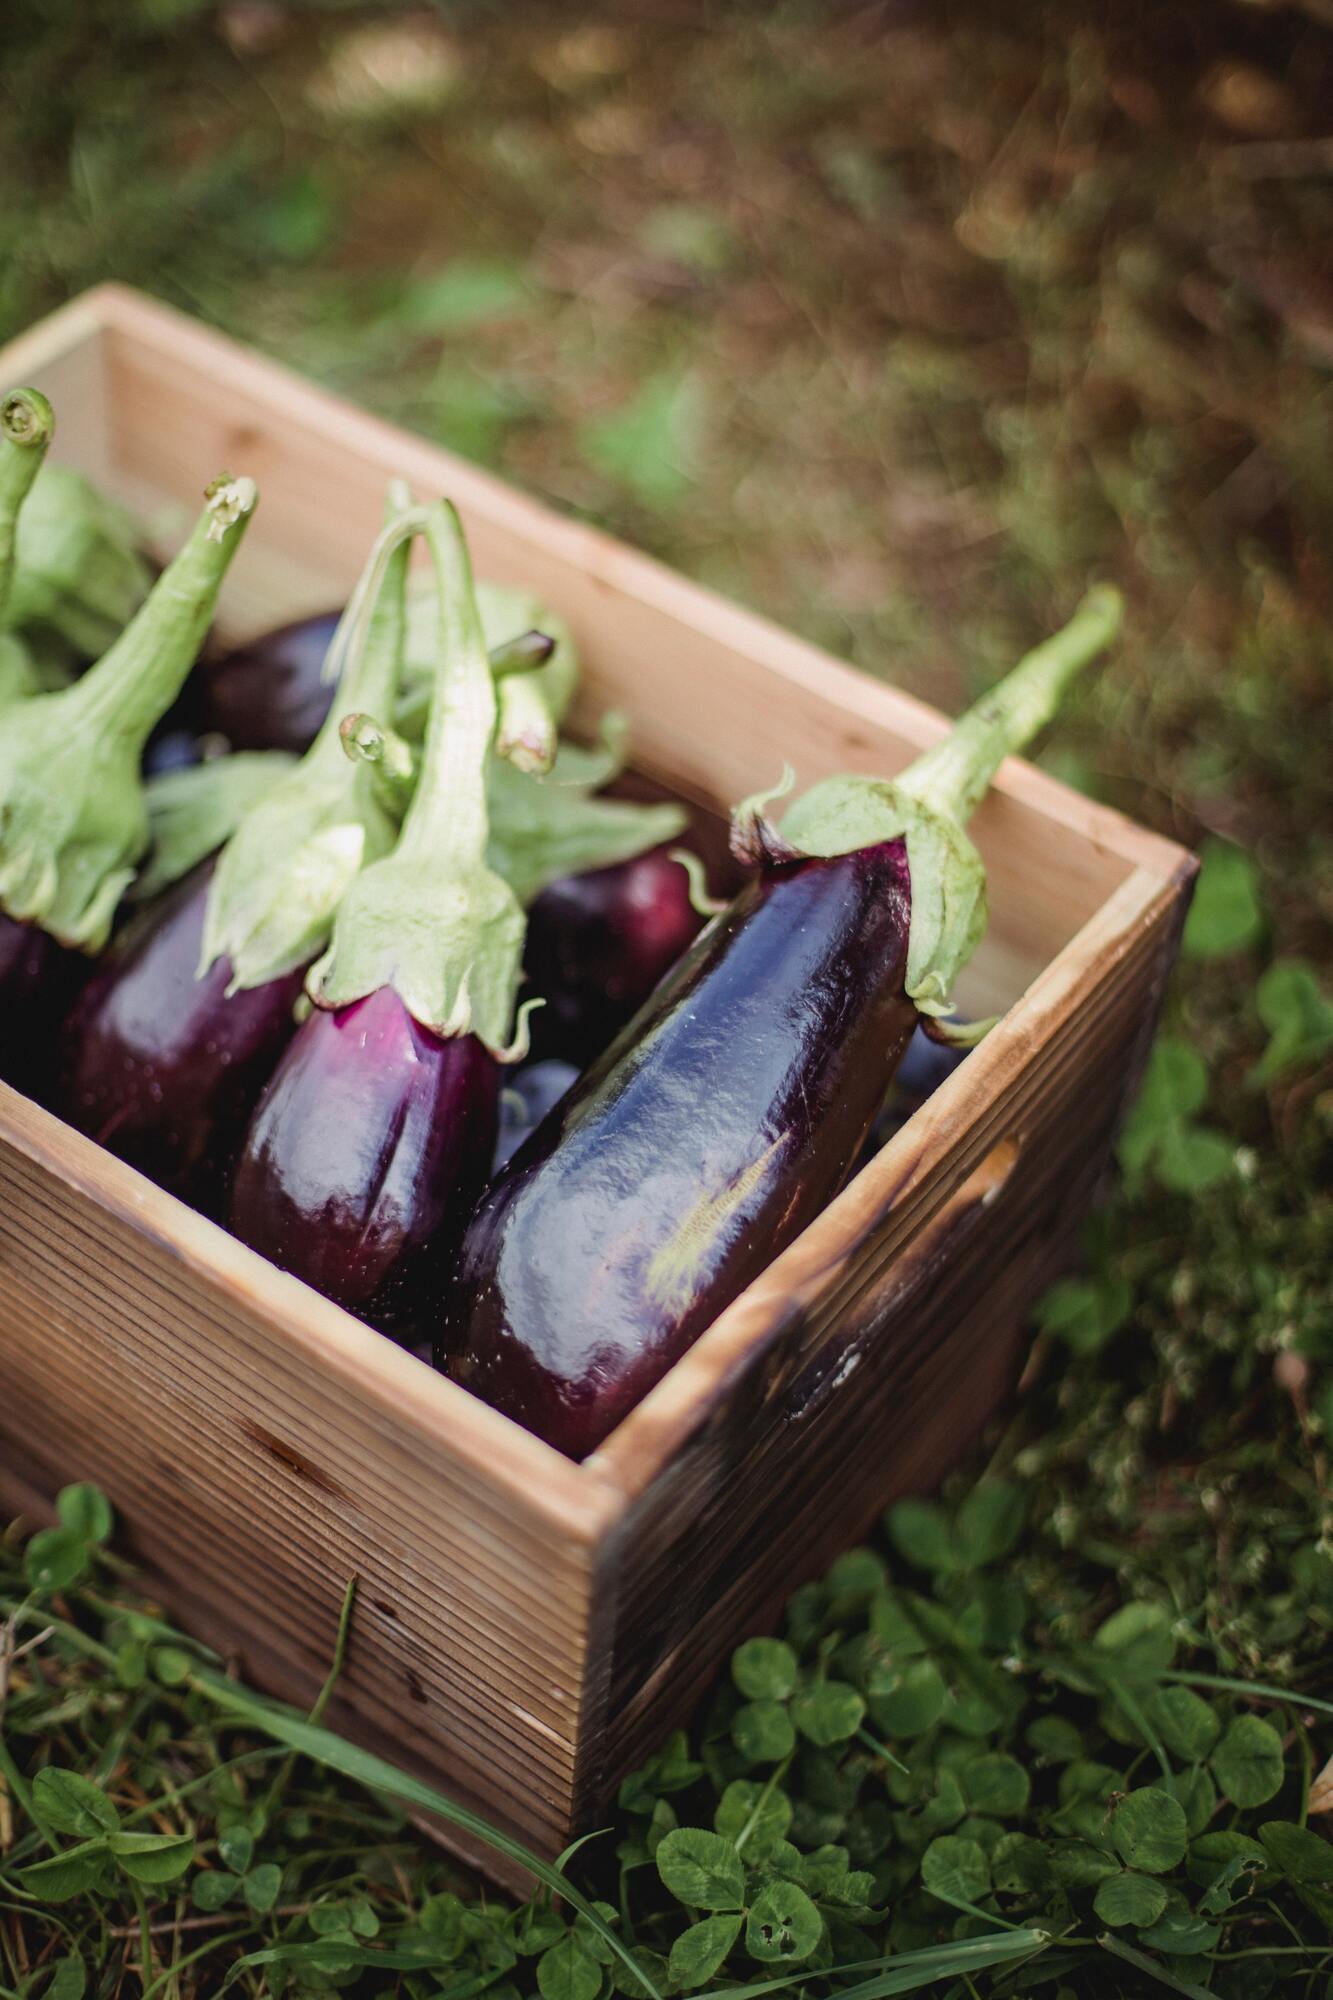 Expert shares why eggplants are healthy and who should not eat them